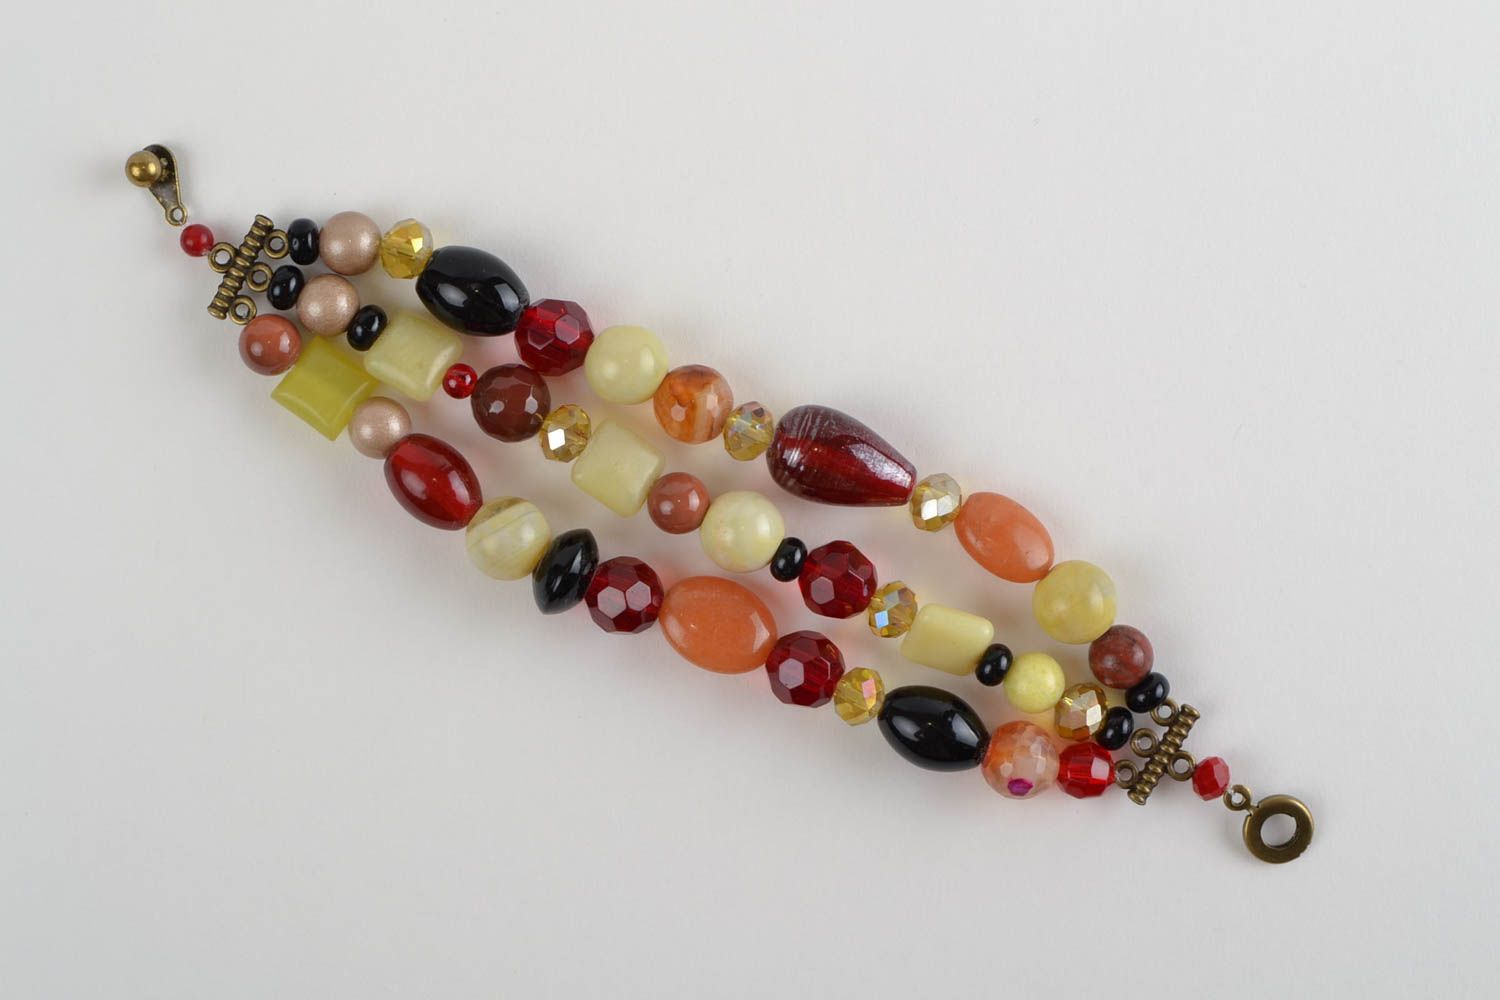 Handmade designer colorful bright wide wrist bracelet with natural stones beads photo 3